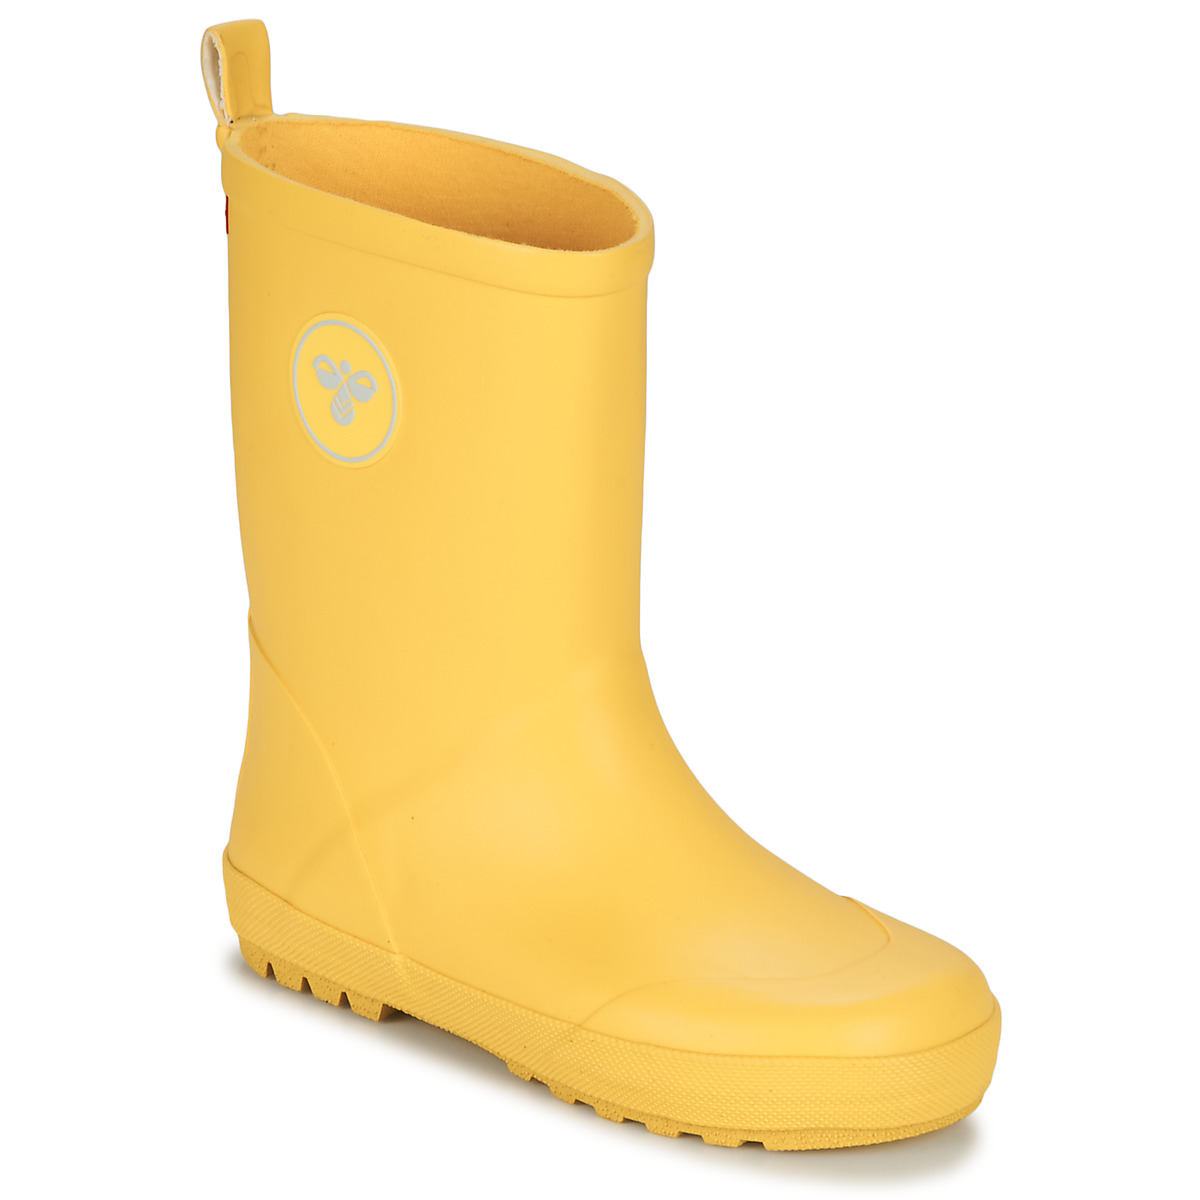 BOOT - boots - Yellow NET Child hummel RUBBER | Spartoo Free ! delivery Wellington Shoes JR.